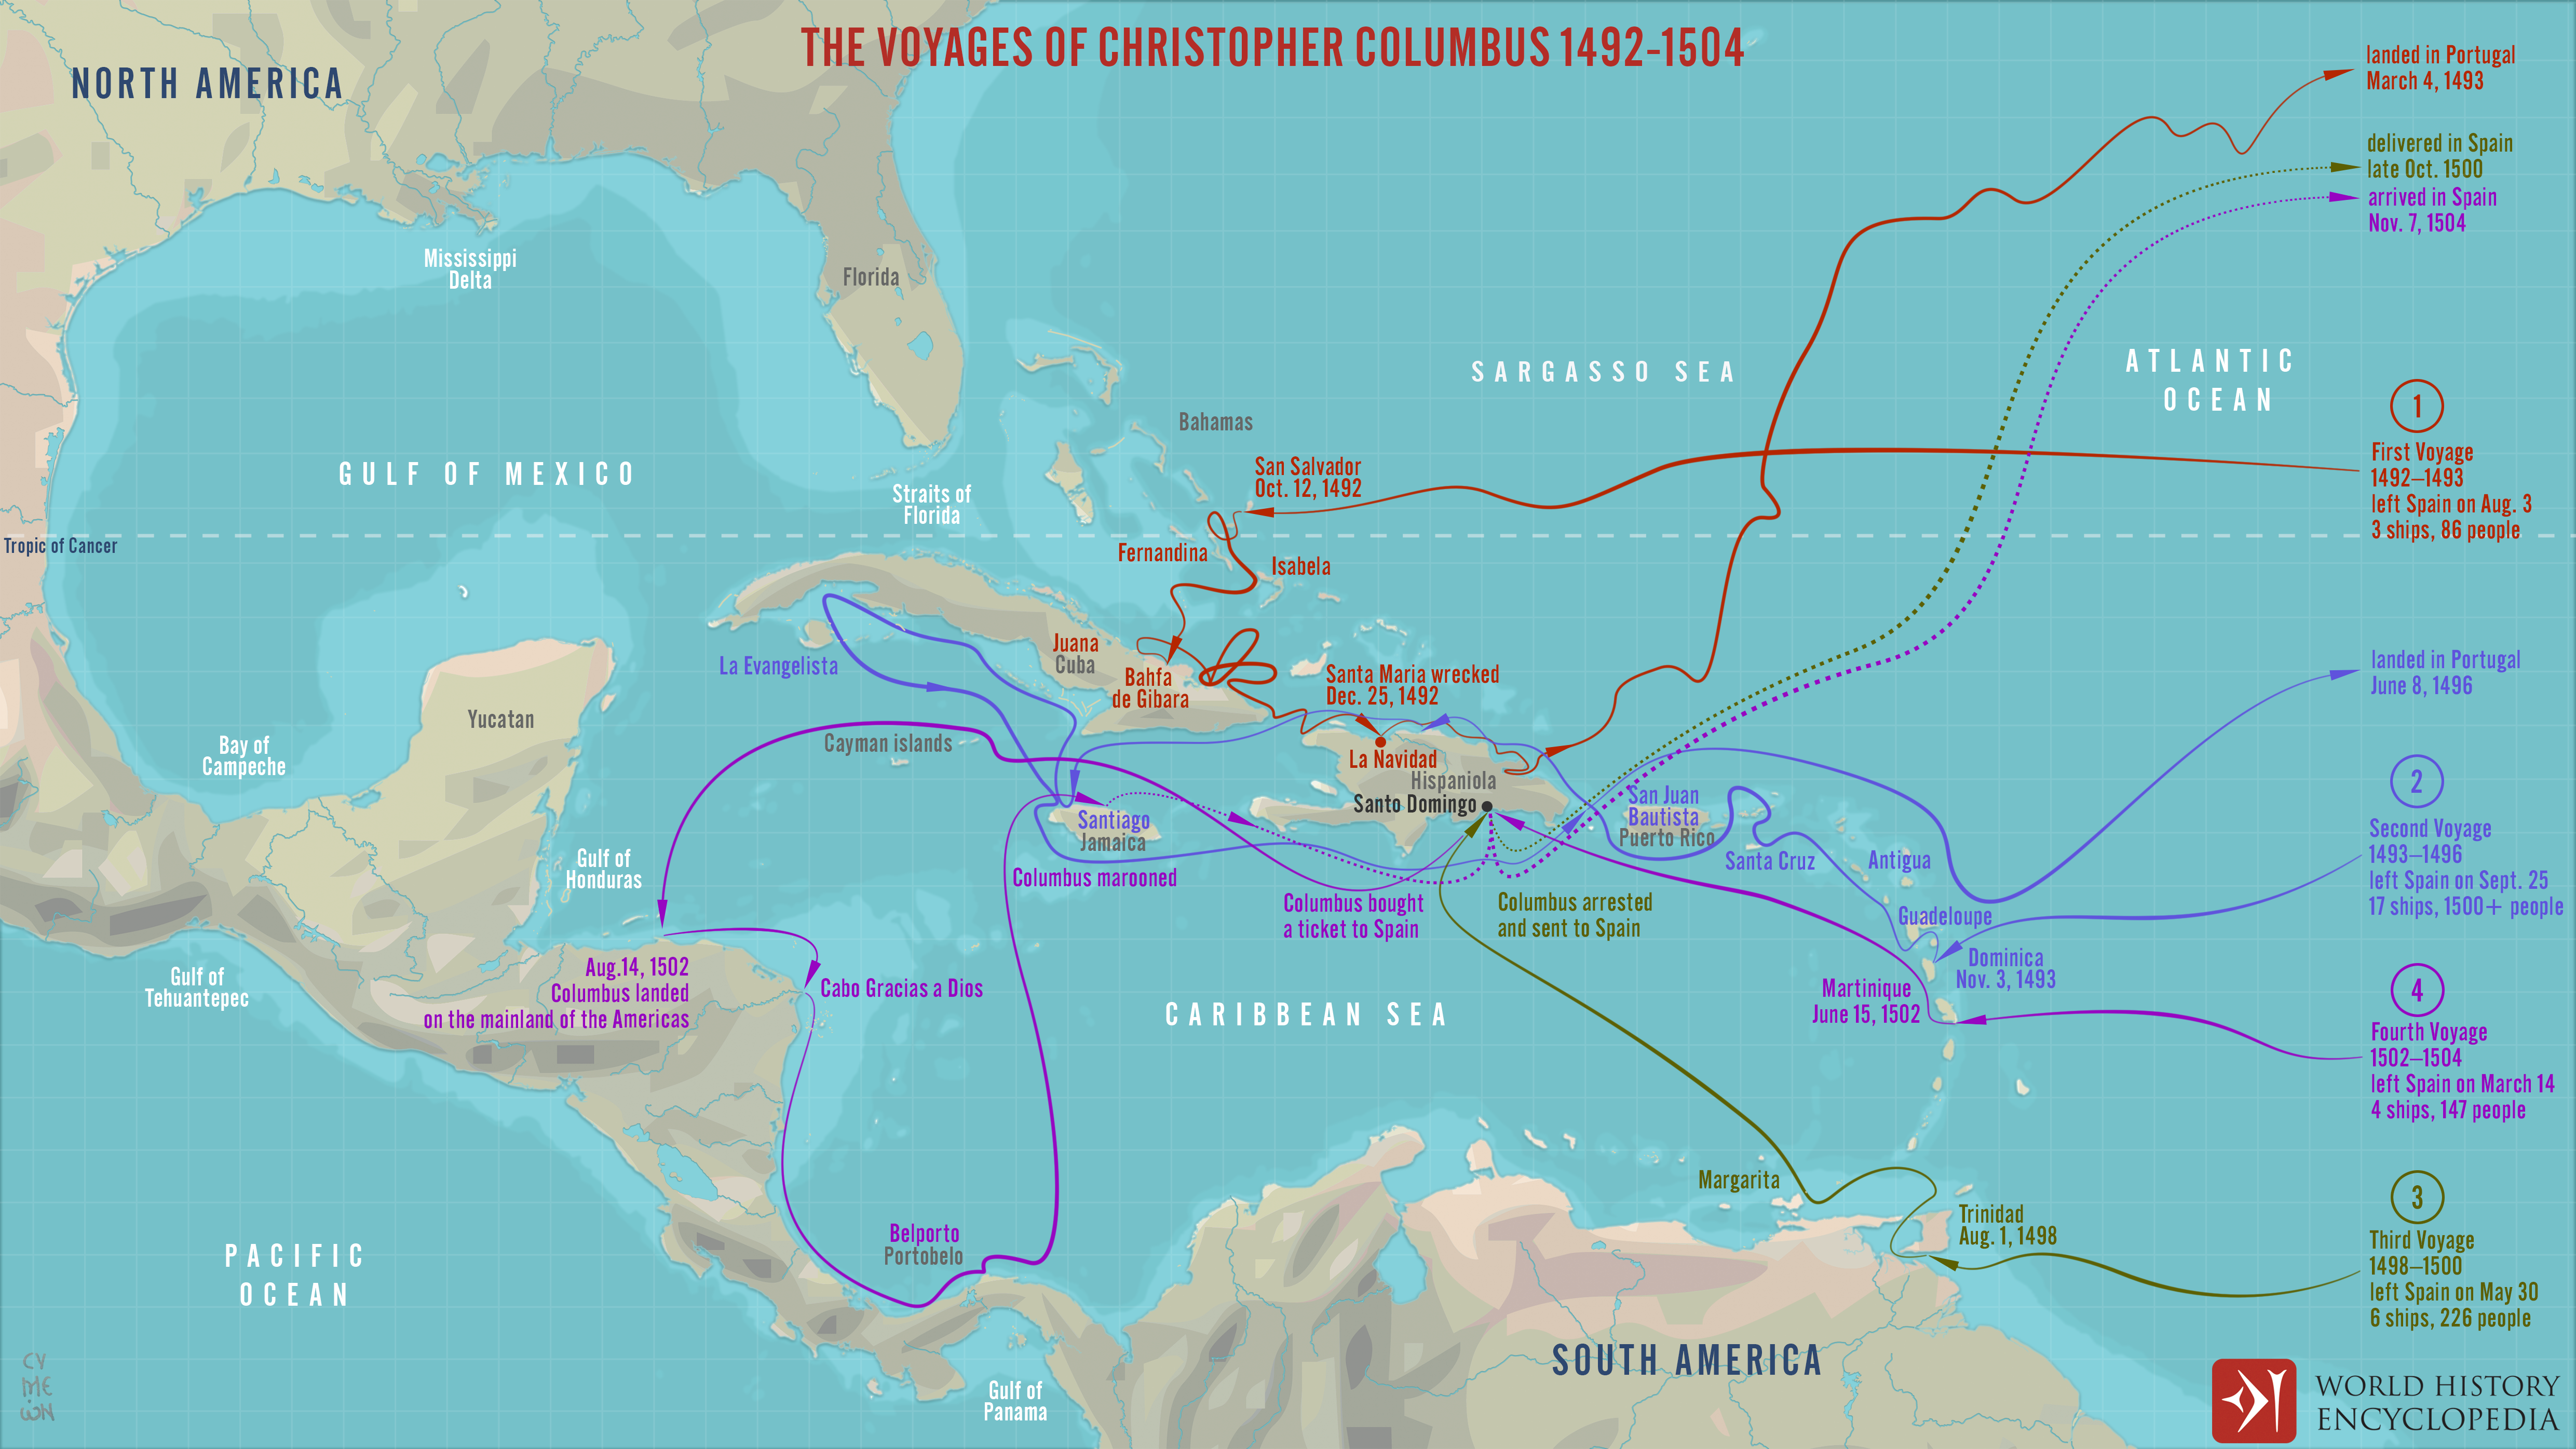 the four voyages of christopher columbus - dszh.ru.